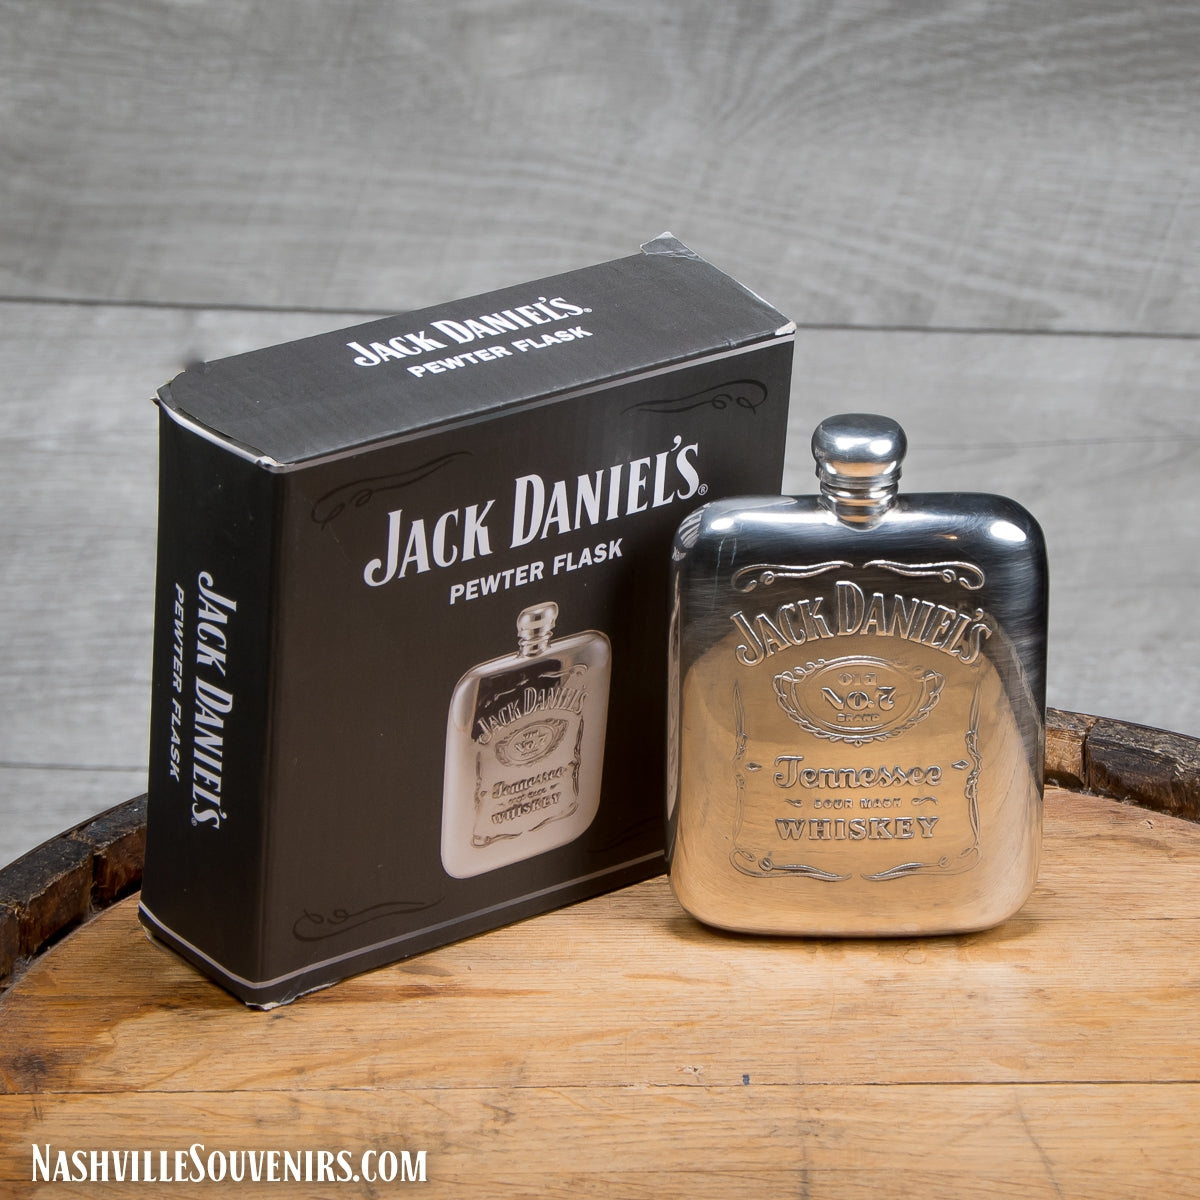 Officially licensed Jack Daniels Pewter Flask (Sheffield) with Bottle Label Logo. A real collector's item. Get it with FREE SHIPPING on all US orders over $75!